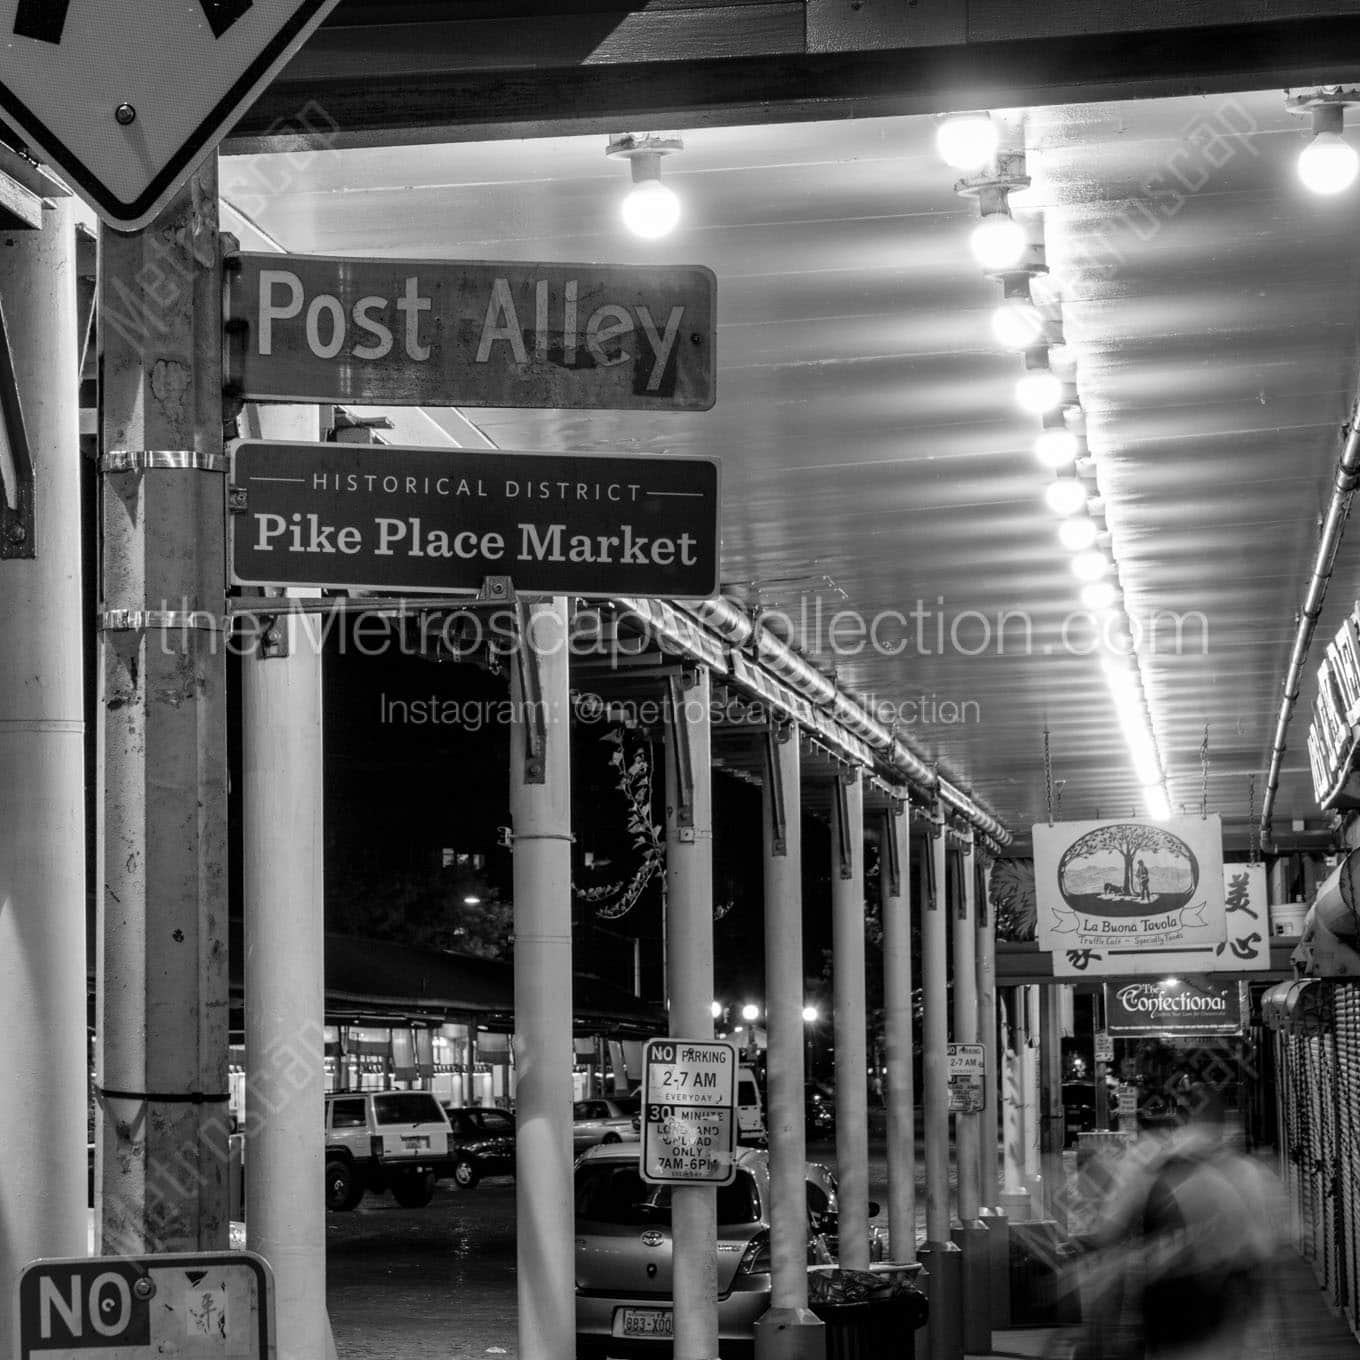 pike place market post alley Black & White Office Art